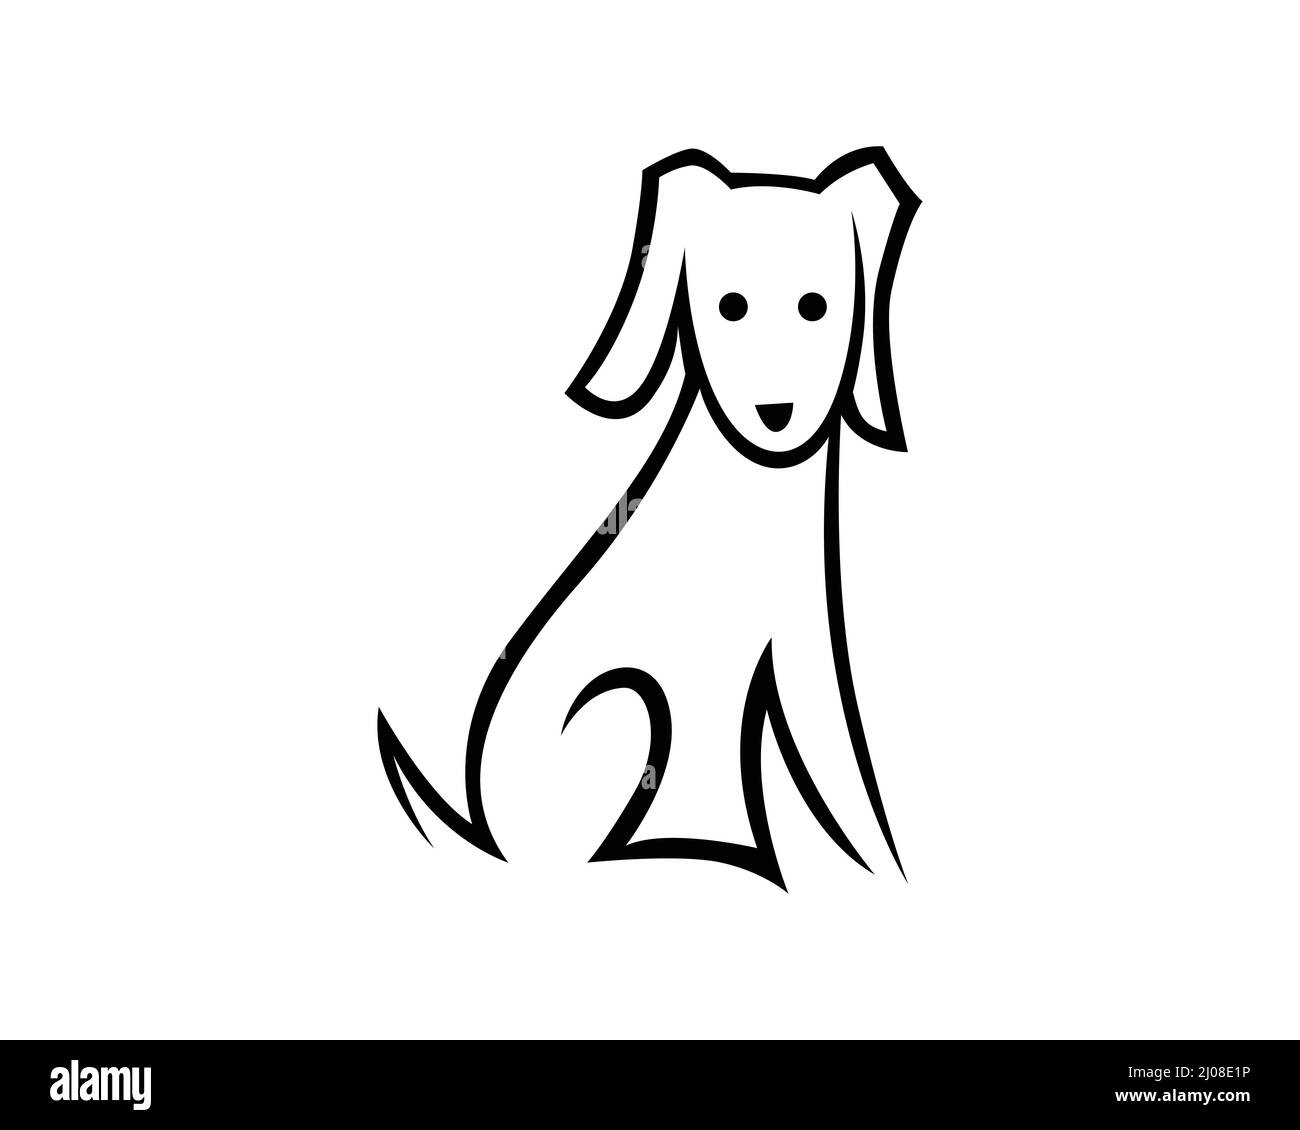 Cute Dog with Sitting Gesture Silhouette Stock Vector